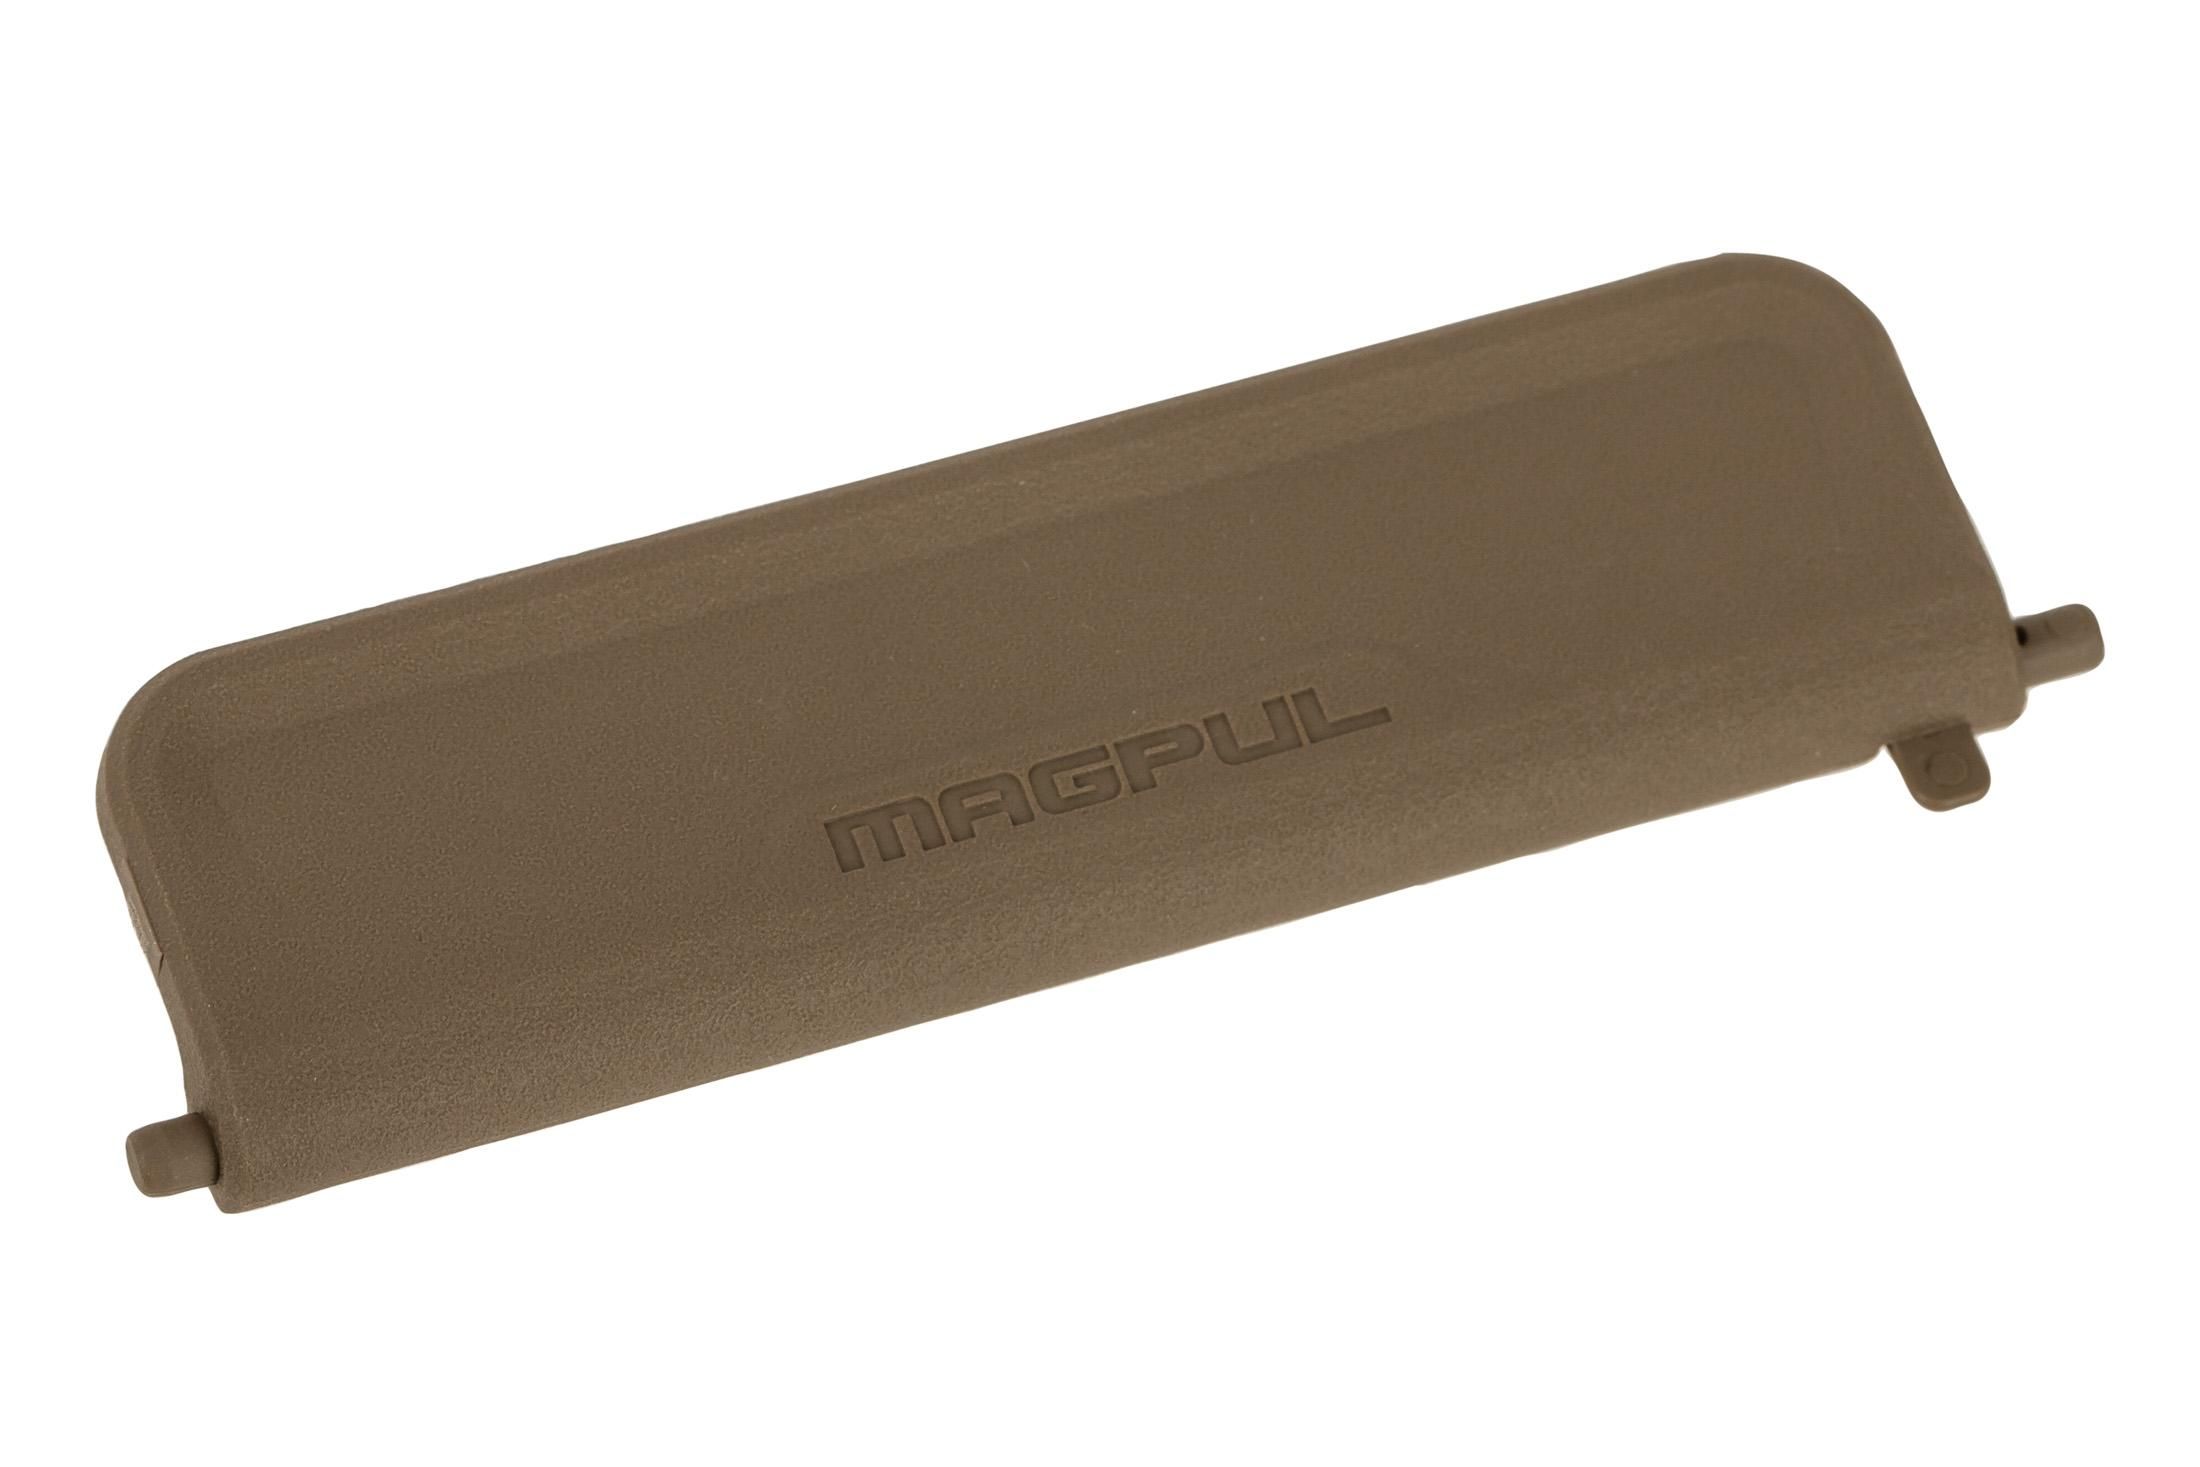 Magpul Enhanced Ejection Port Cover - FDE